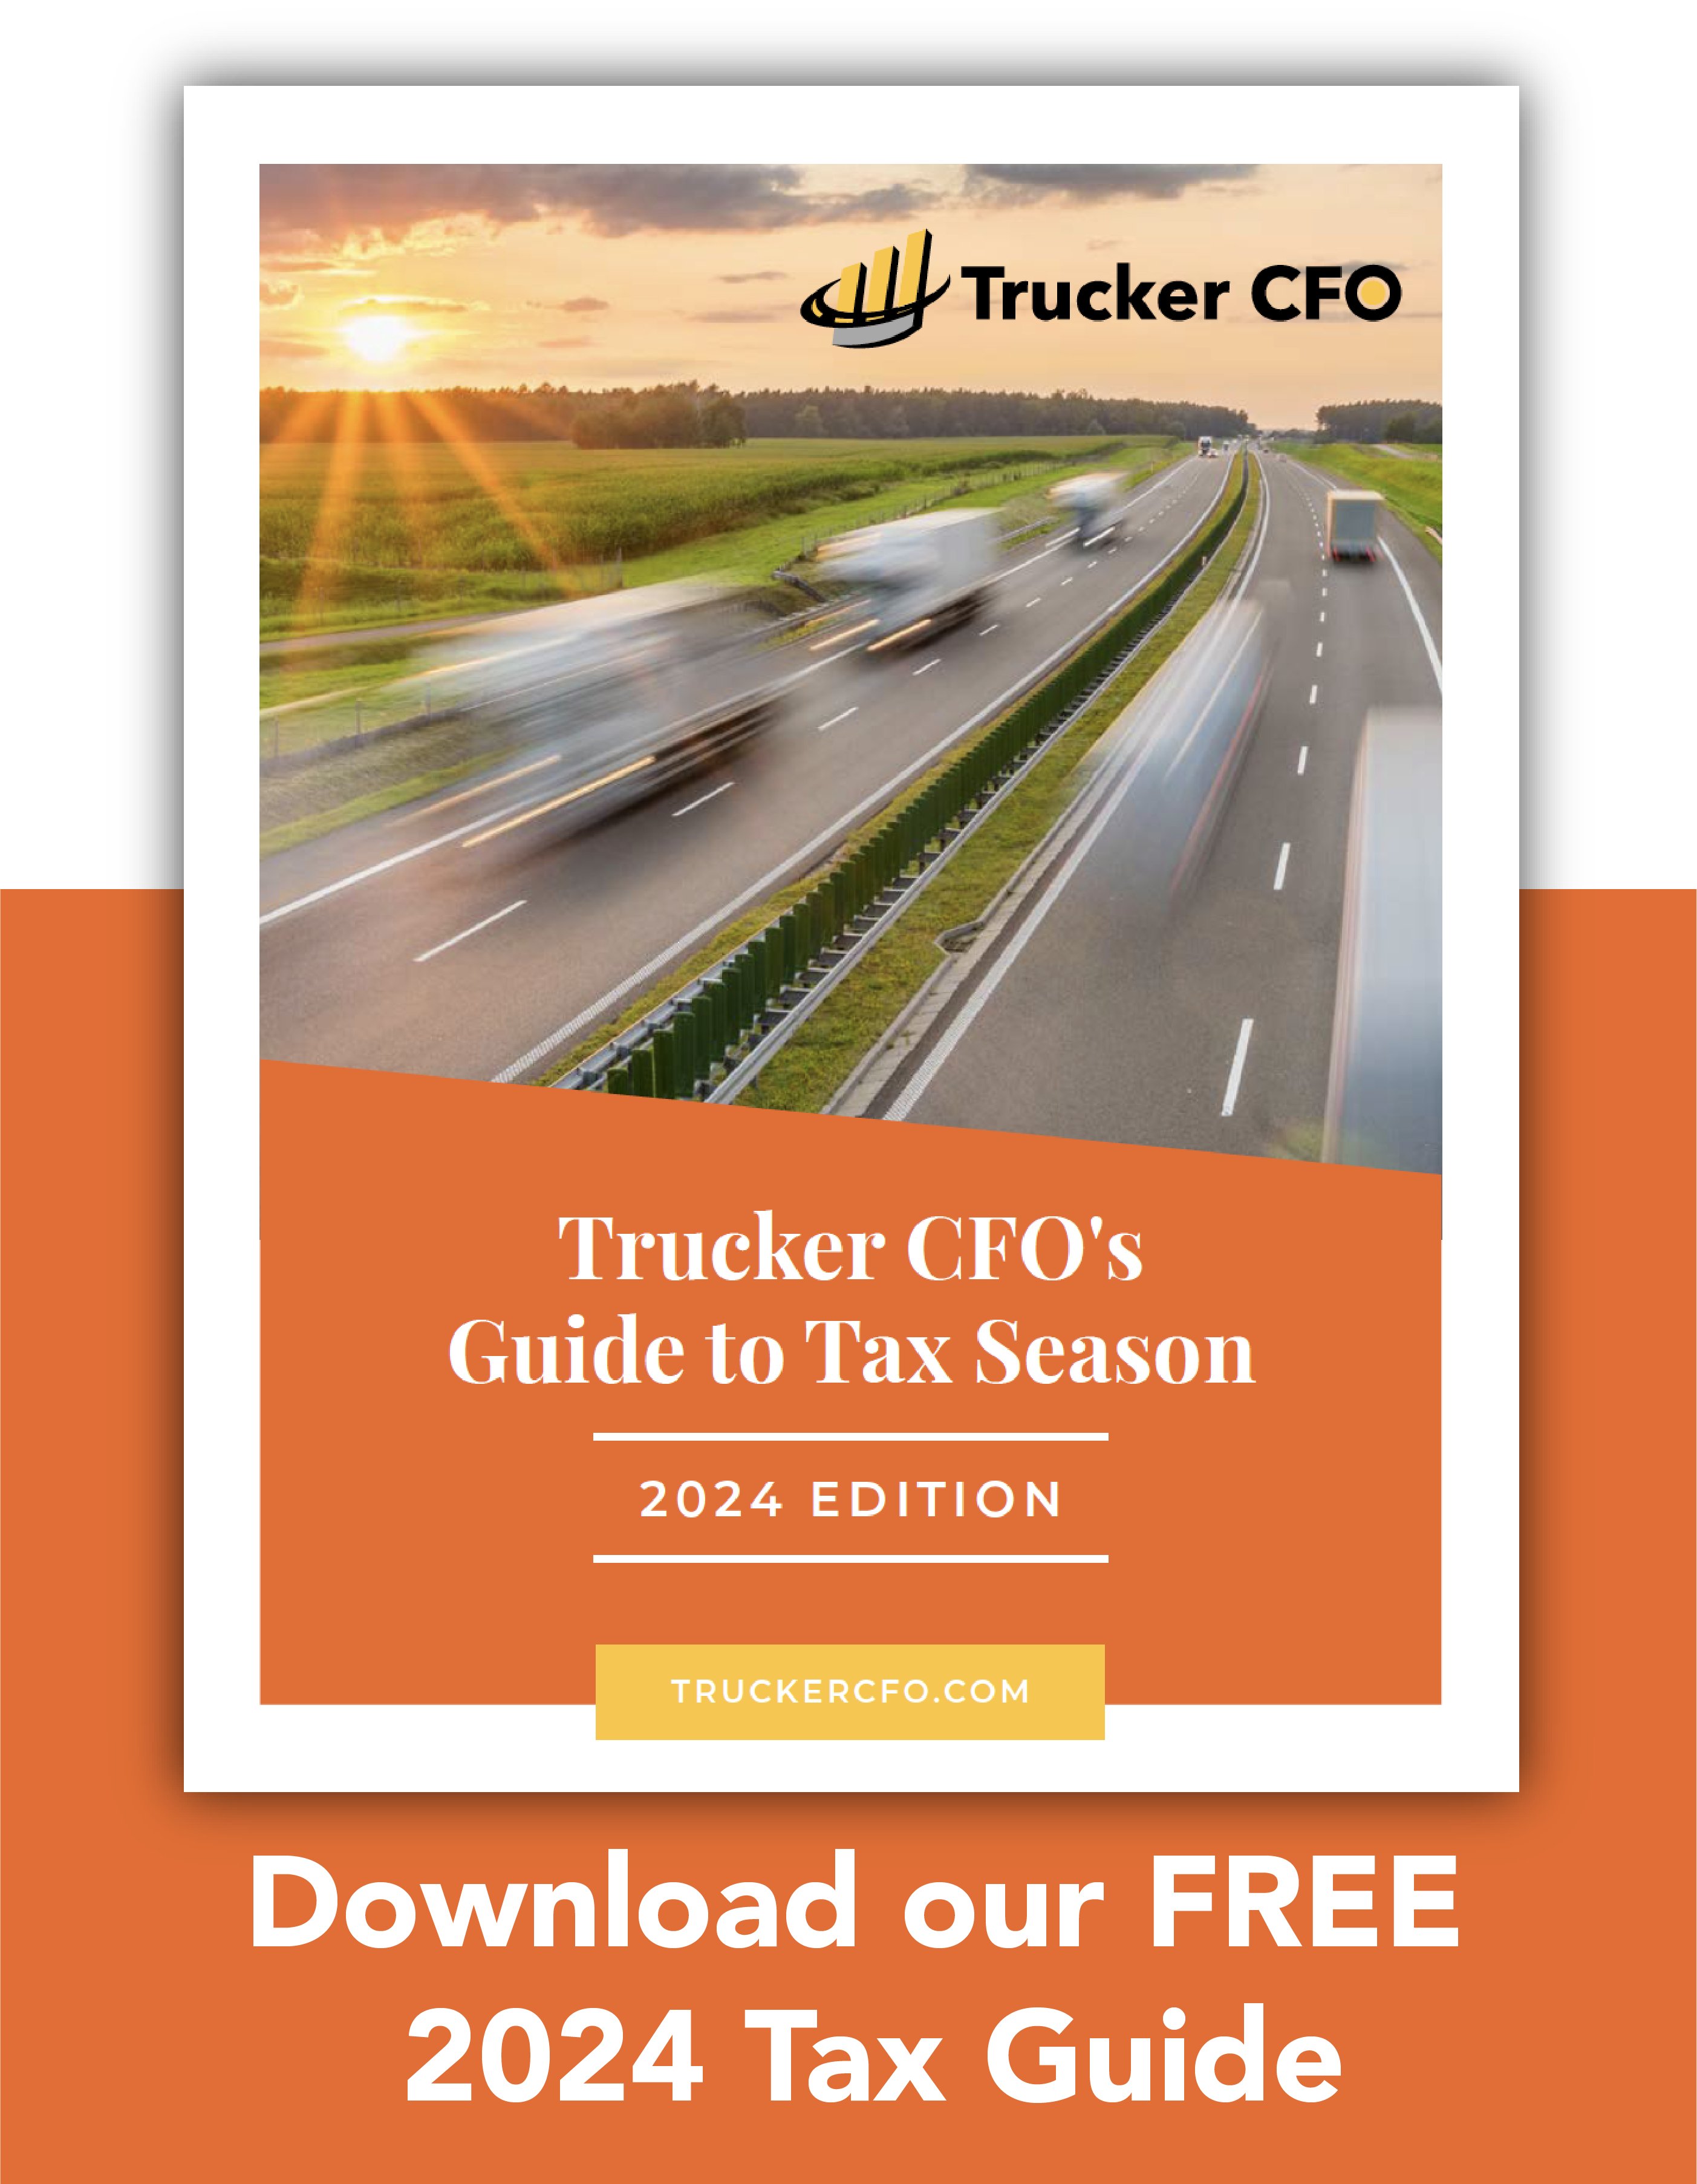 Cover of the Trucker CFO free 2024 Tax Guide